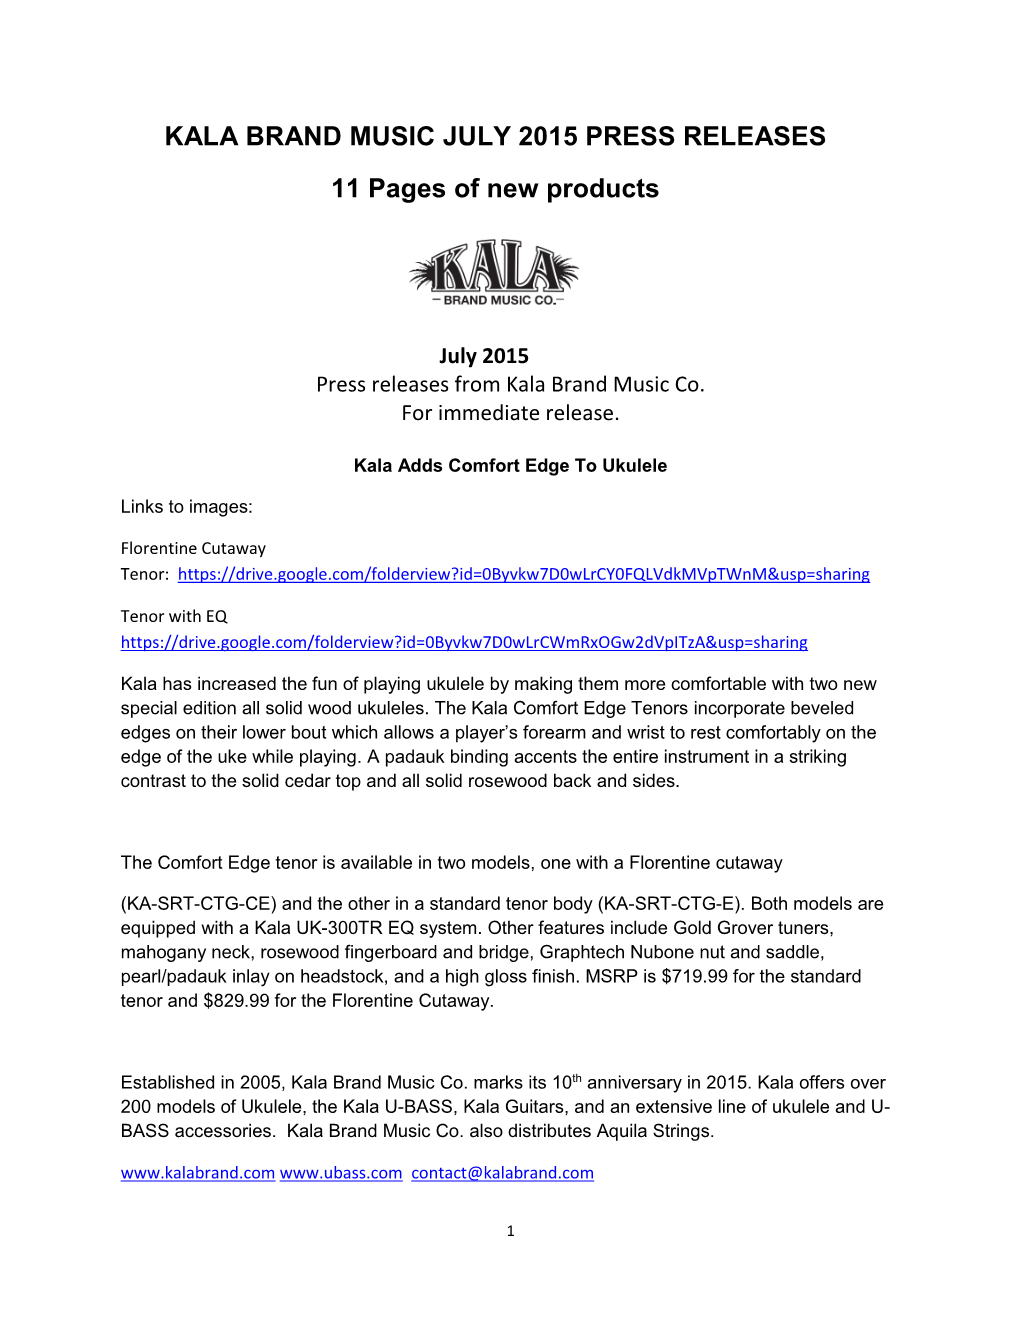 KALA BRAND MUSIC JULY 2015 PRESS RELEASES 11 Pages of New Products